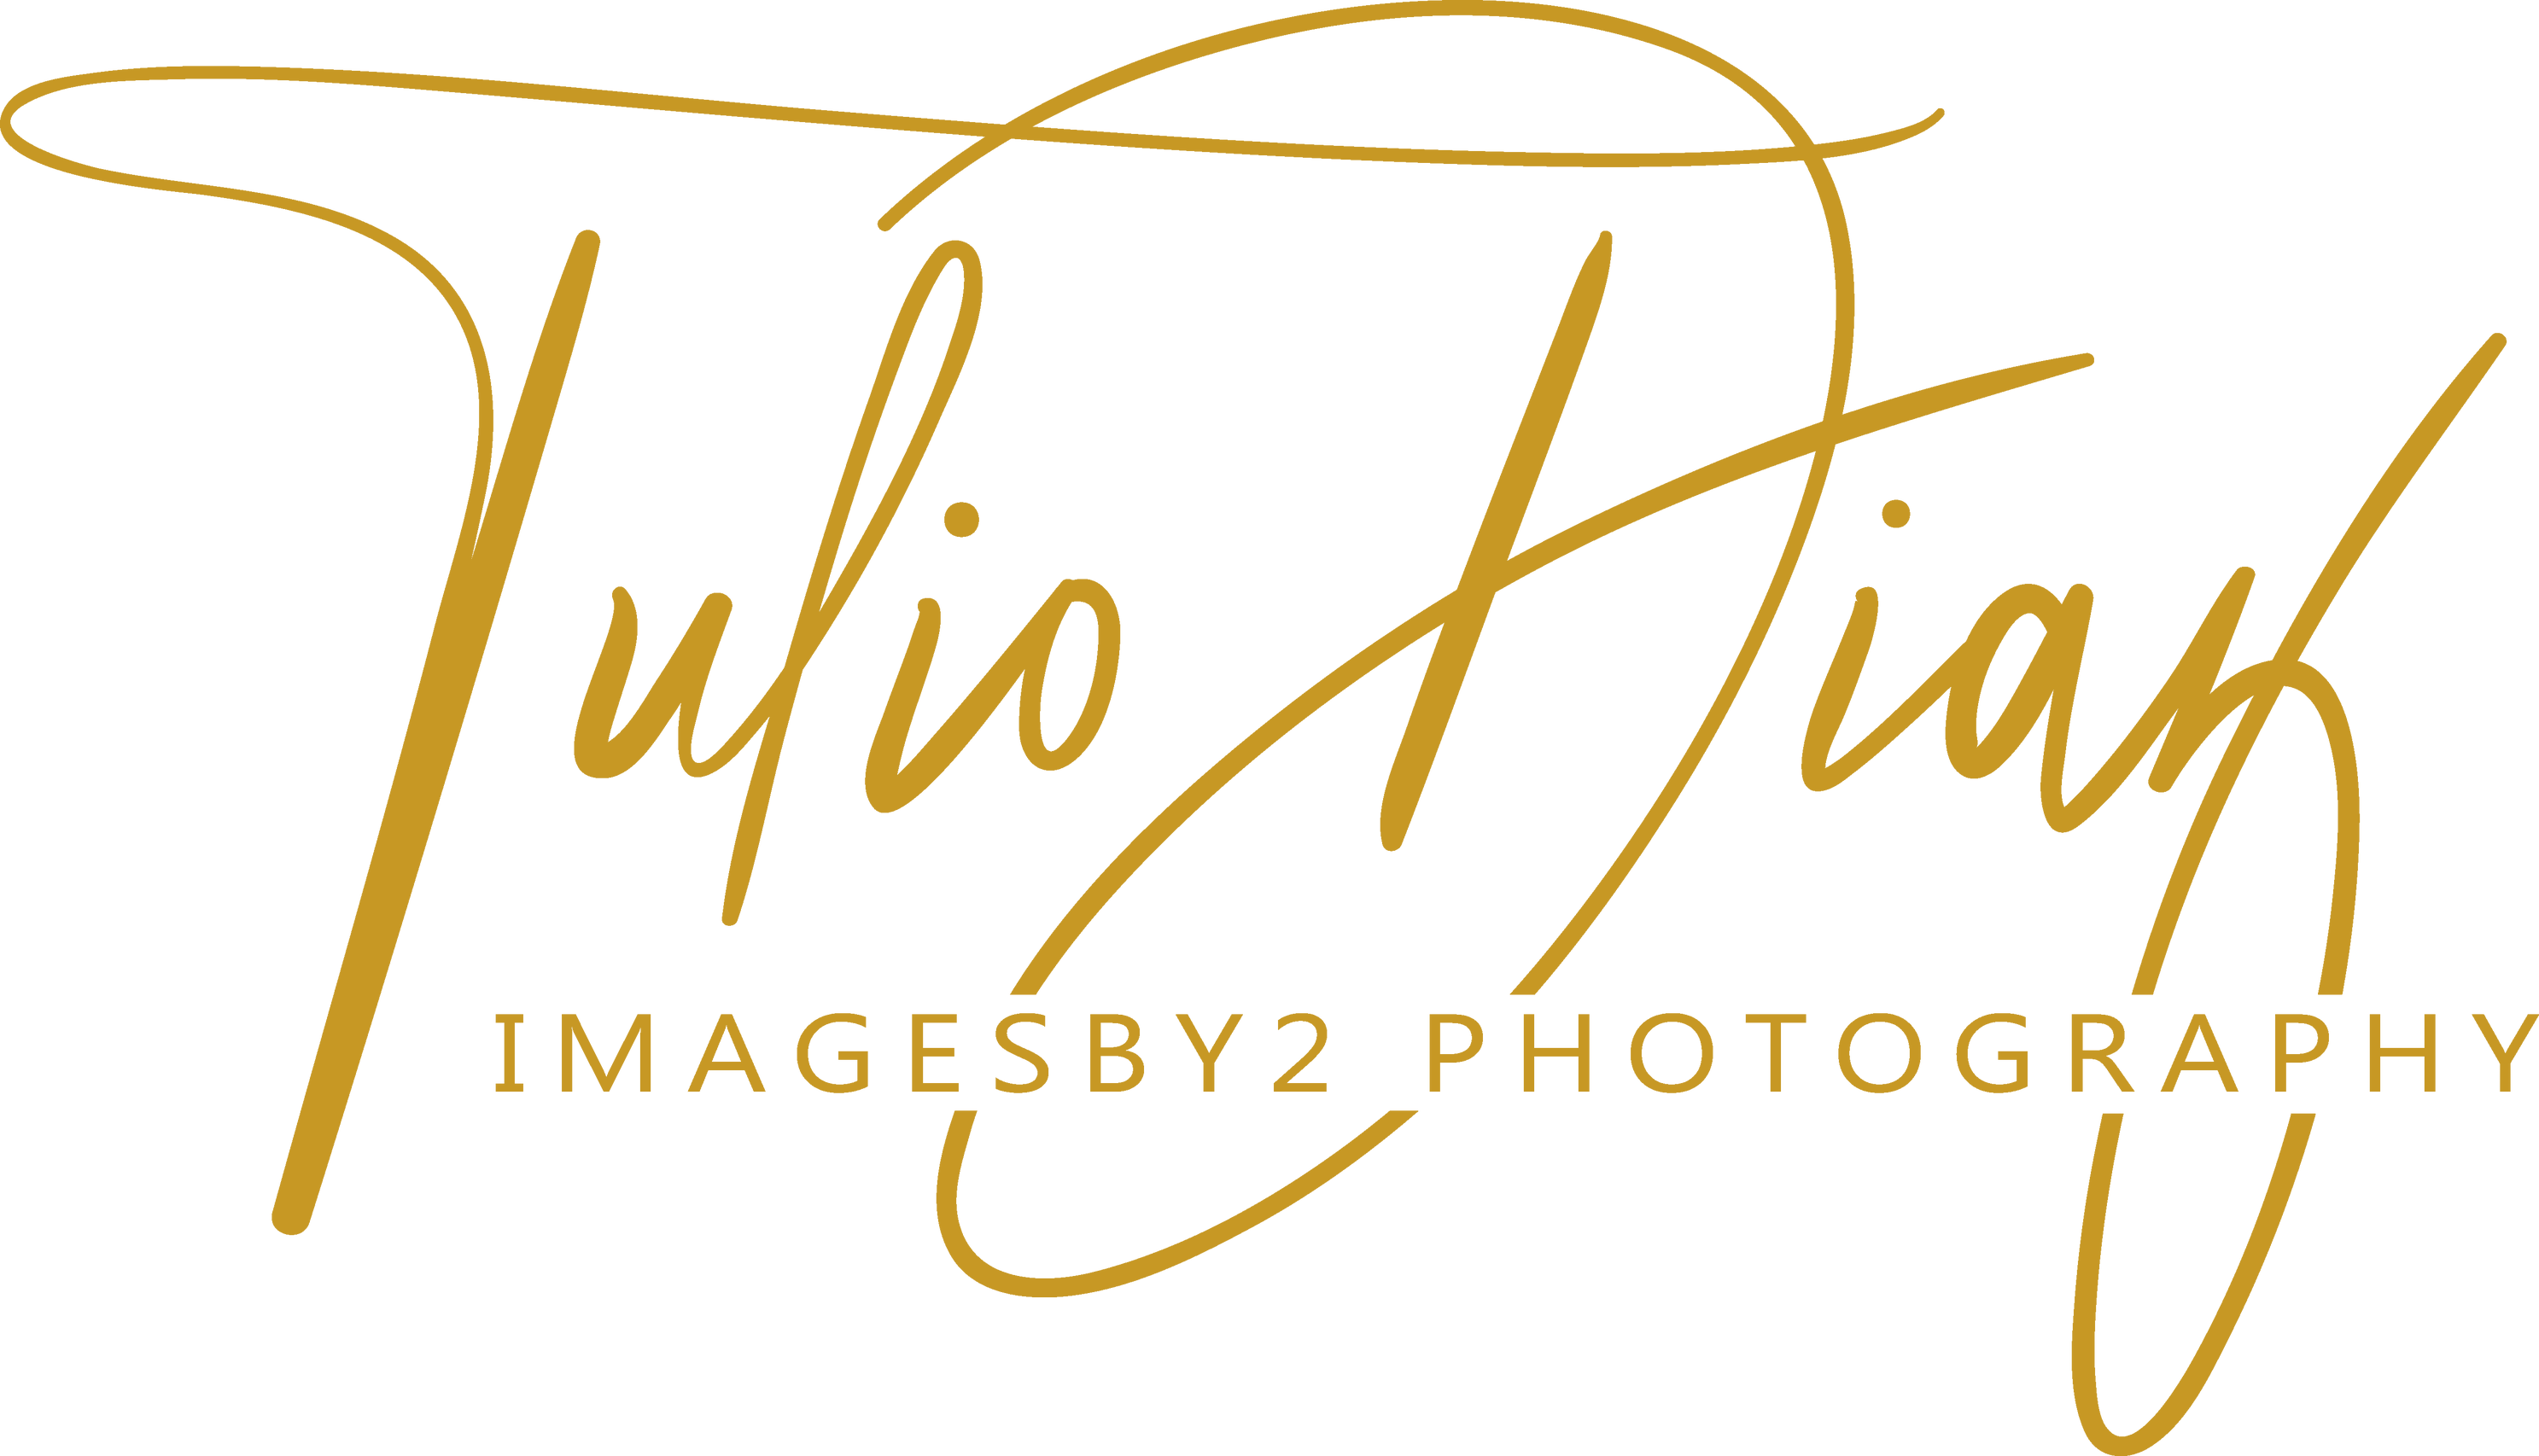 Imagesby2 professional Photographer serving Southern California